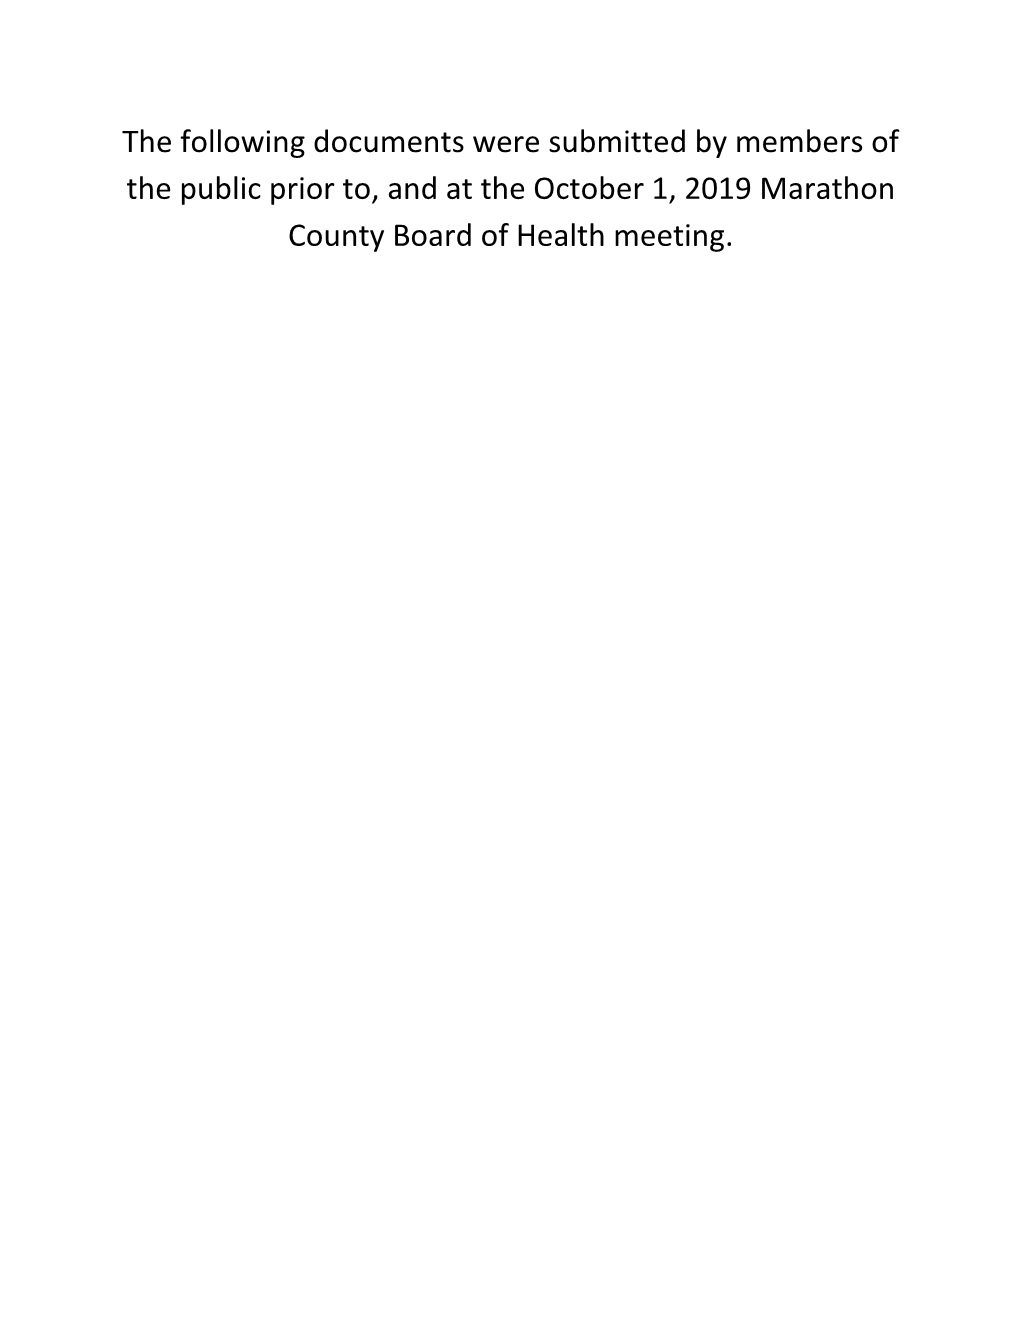 The Following Documents Were Submitted by Members of the Public Prior To, and at the October 1, 2019 Marathon County Board of Health Meeting